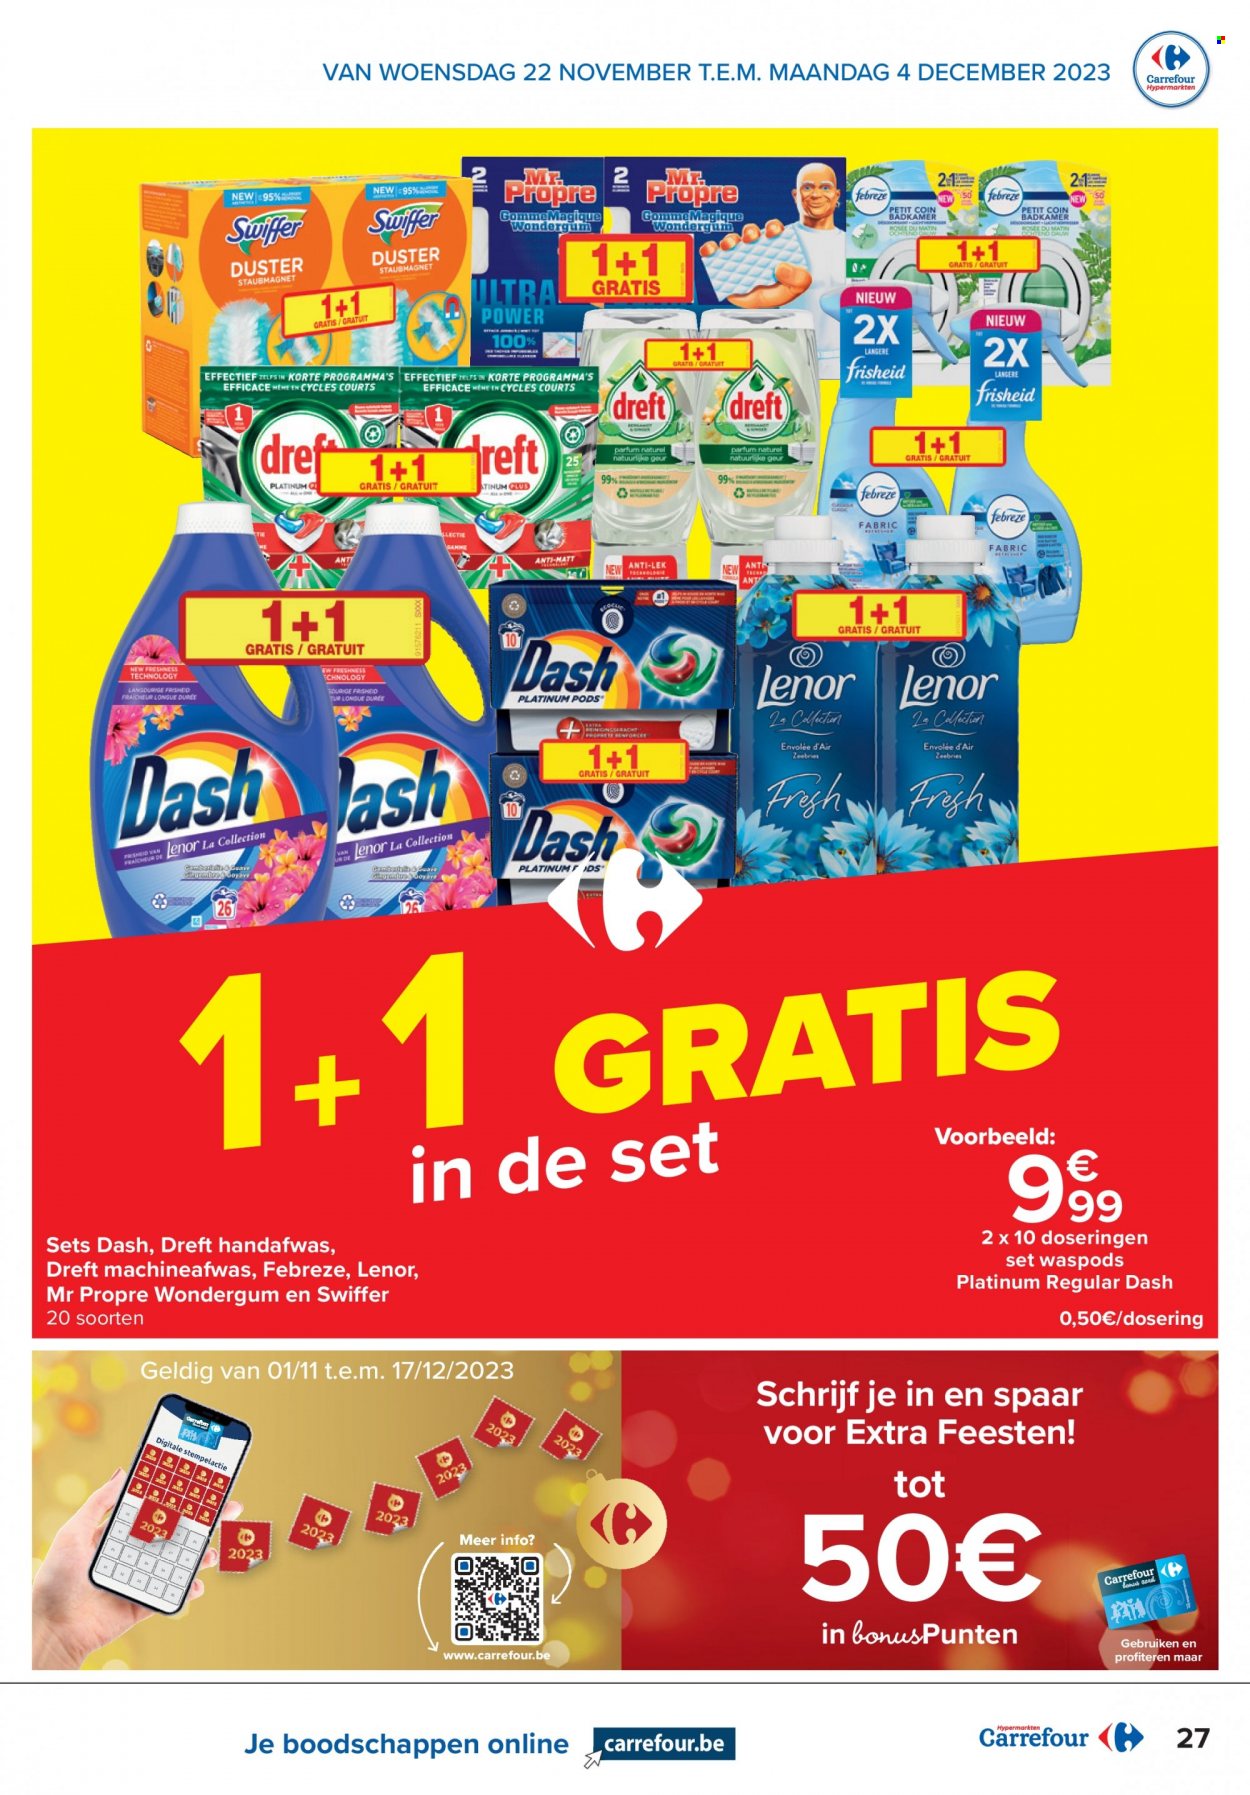 Catalogue Carrefour hypermarkt - 22.11.2023 - 4.12.2023. Page 27.